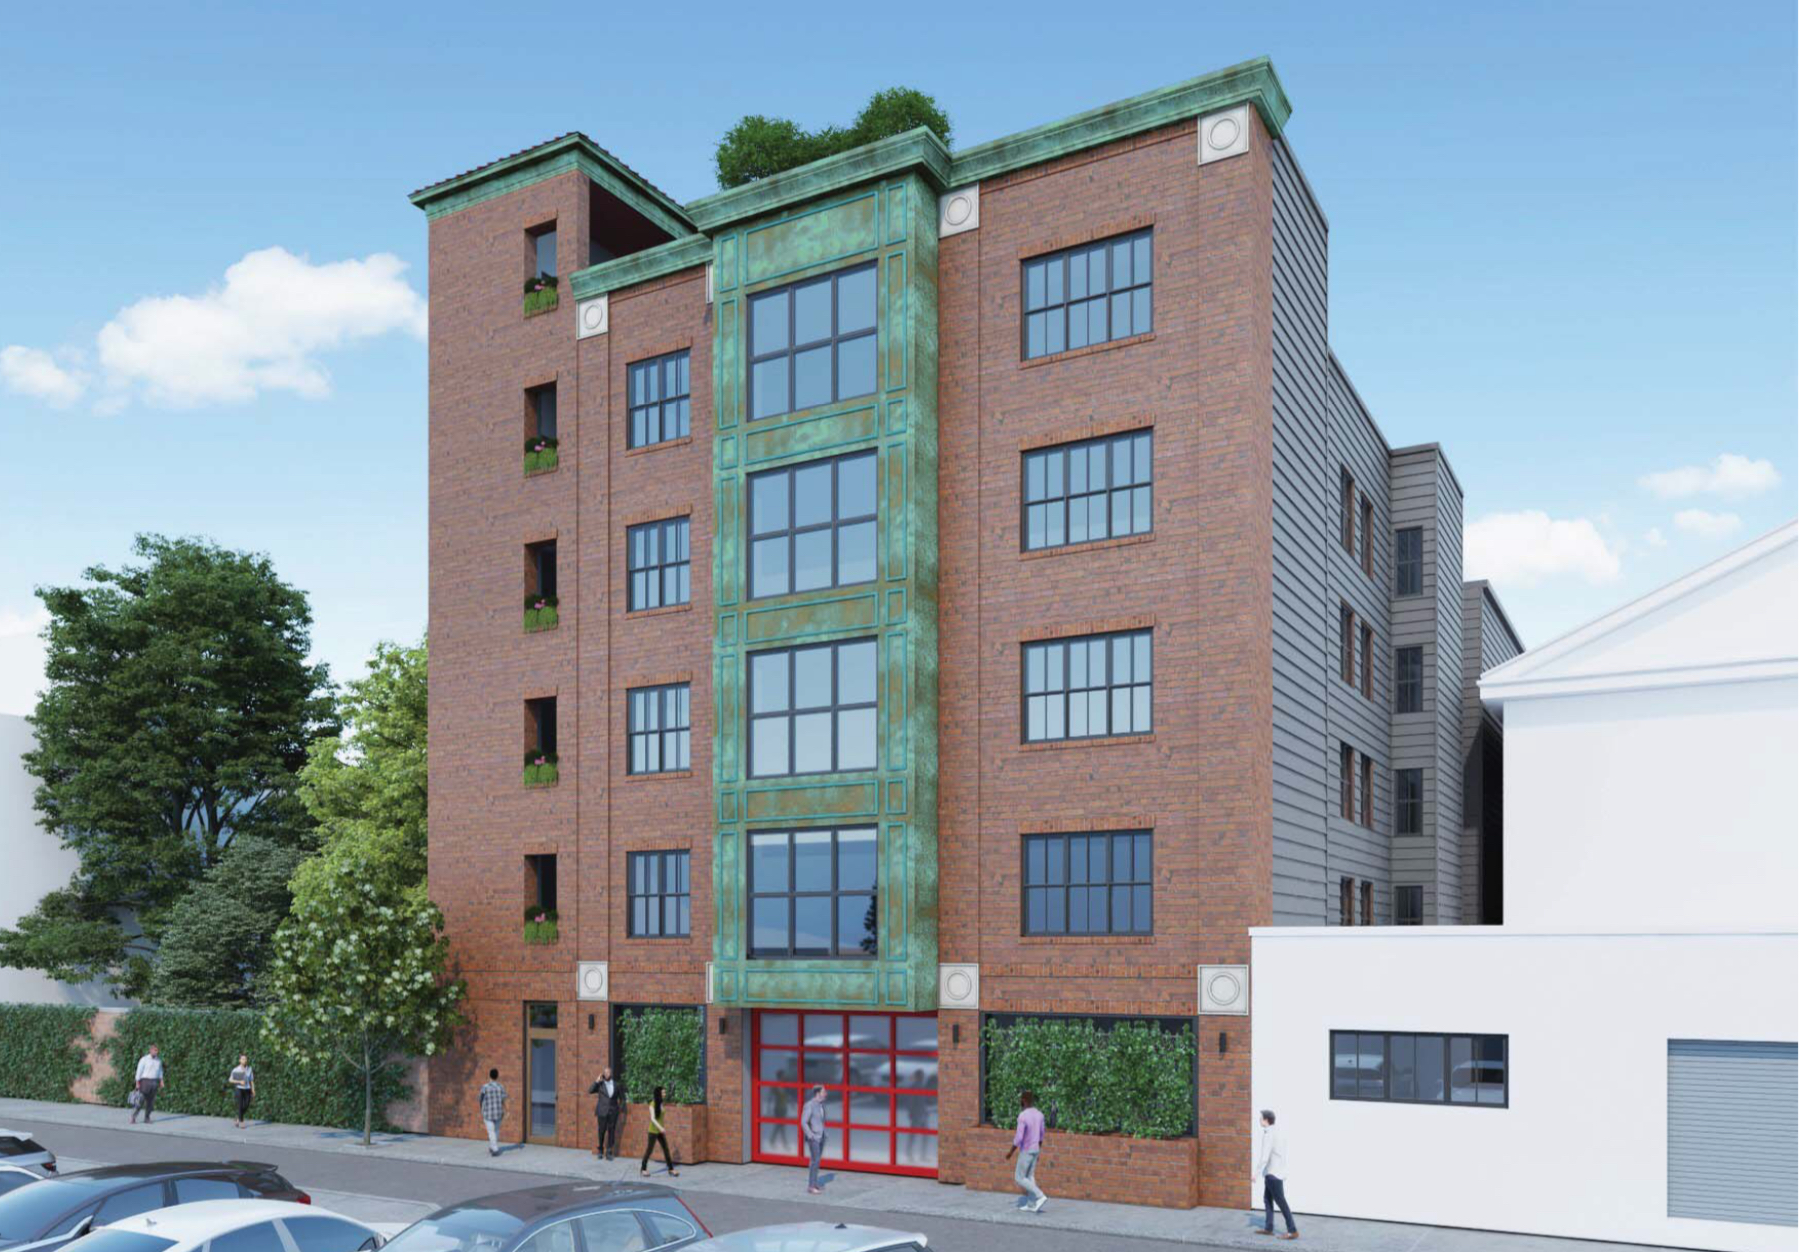 Rendering of 1221-25 North 4th Street. Credit: Continuum Architecture.